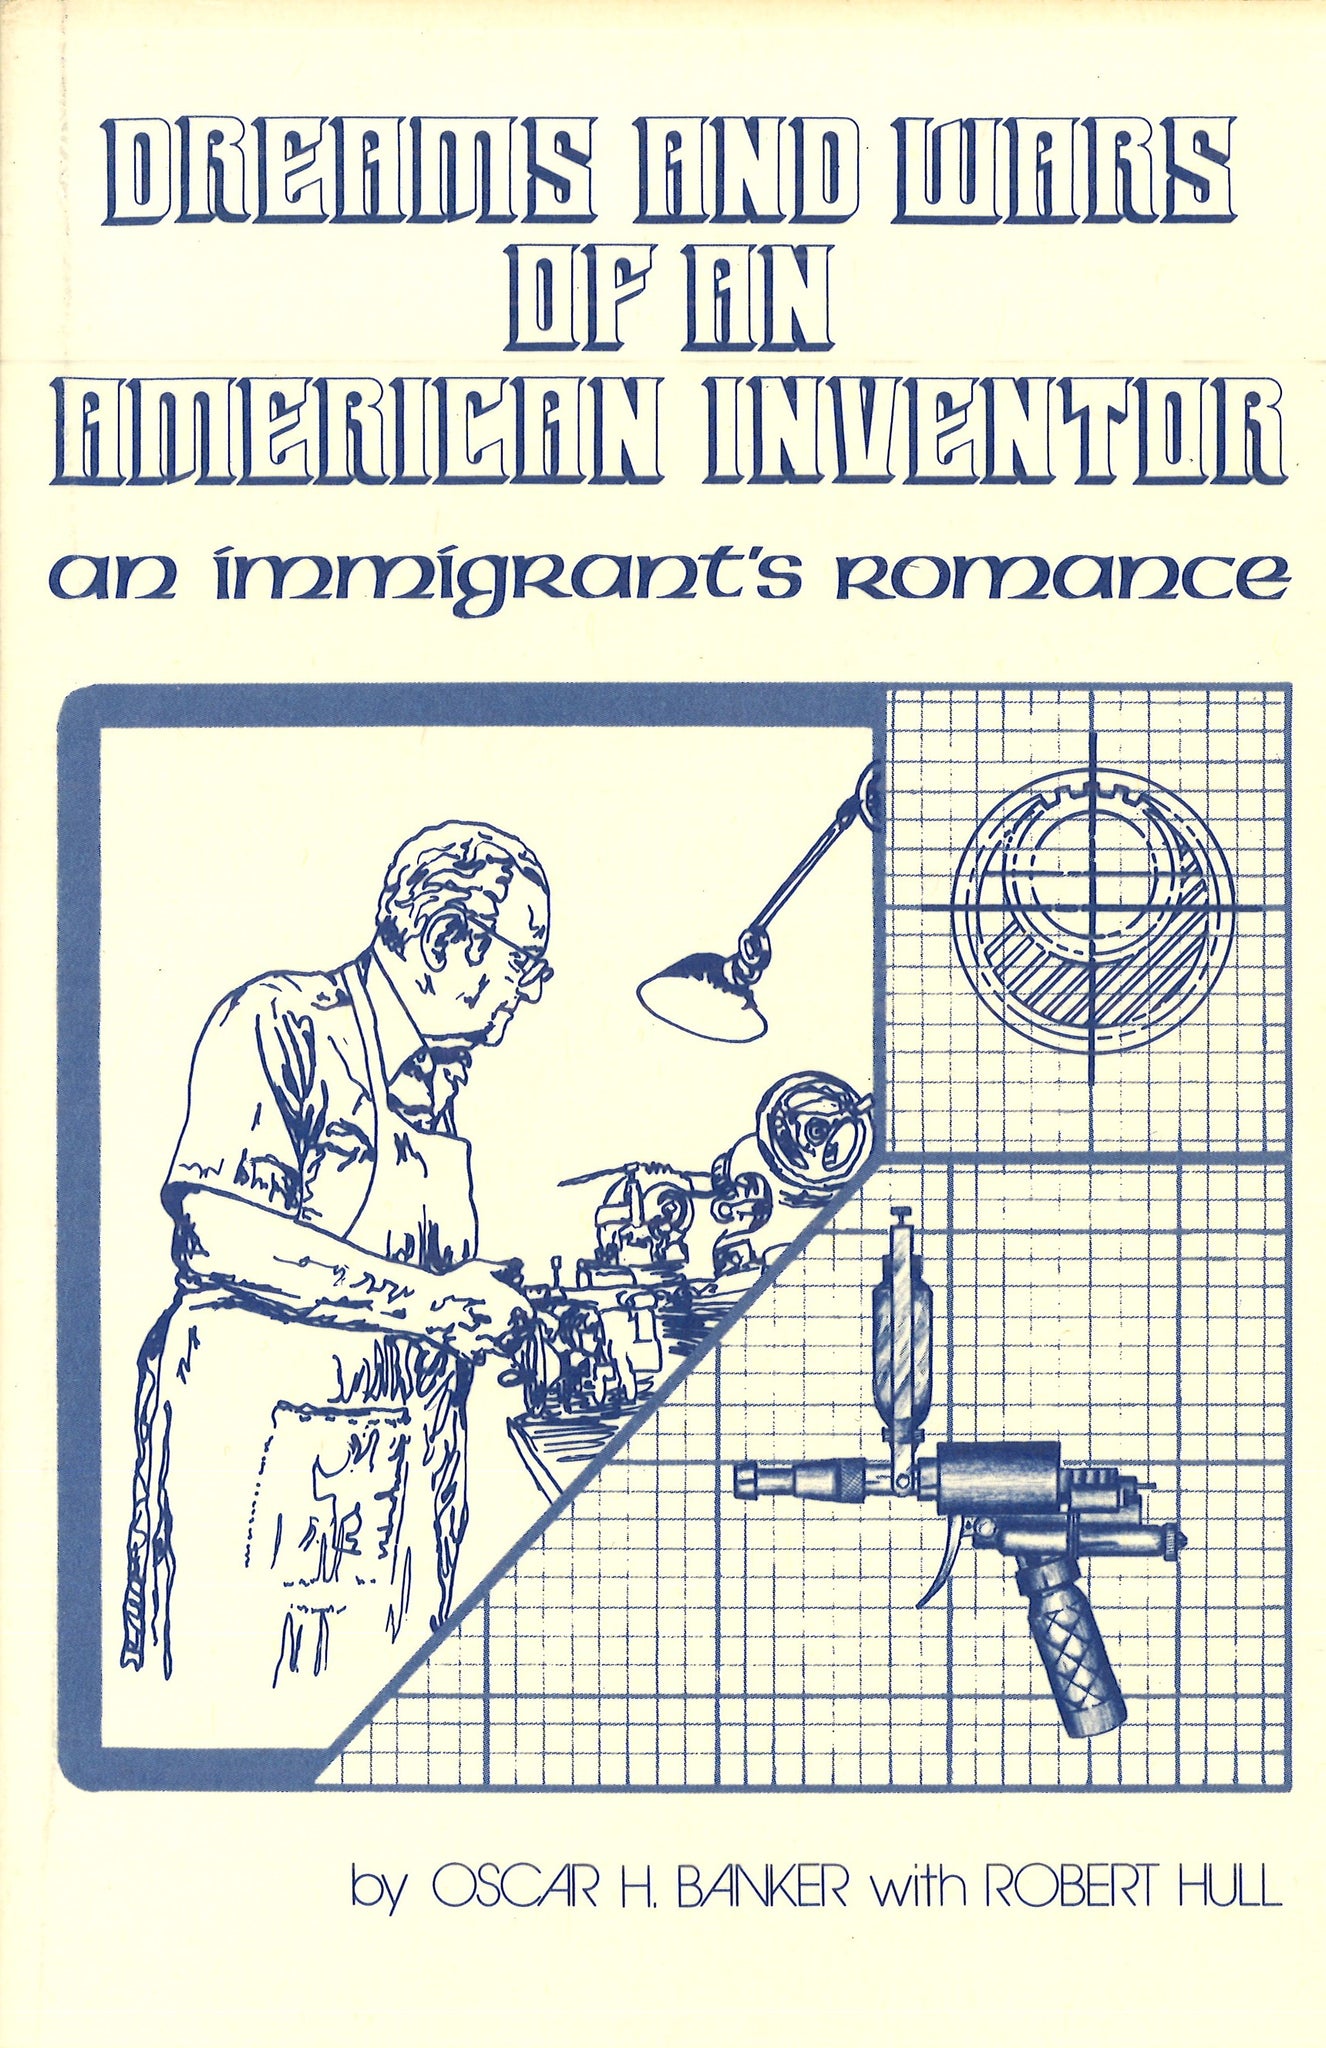 DREAMS AND WARS OF AN AMERICAN INVENTOR: An Immigrant's Romance